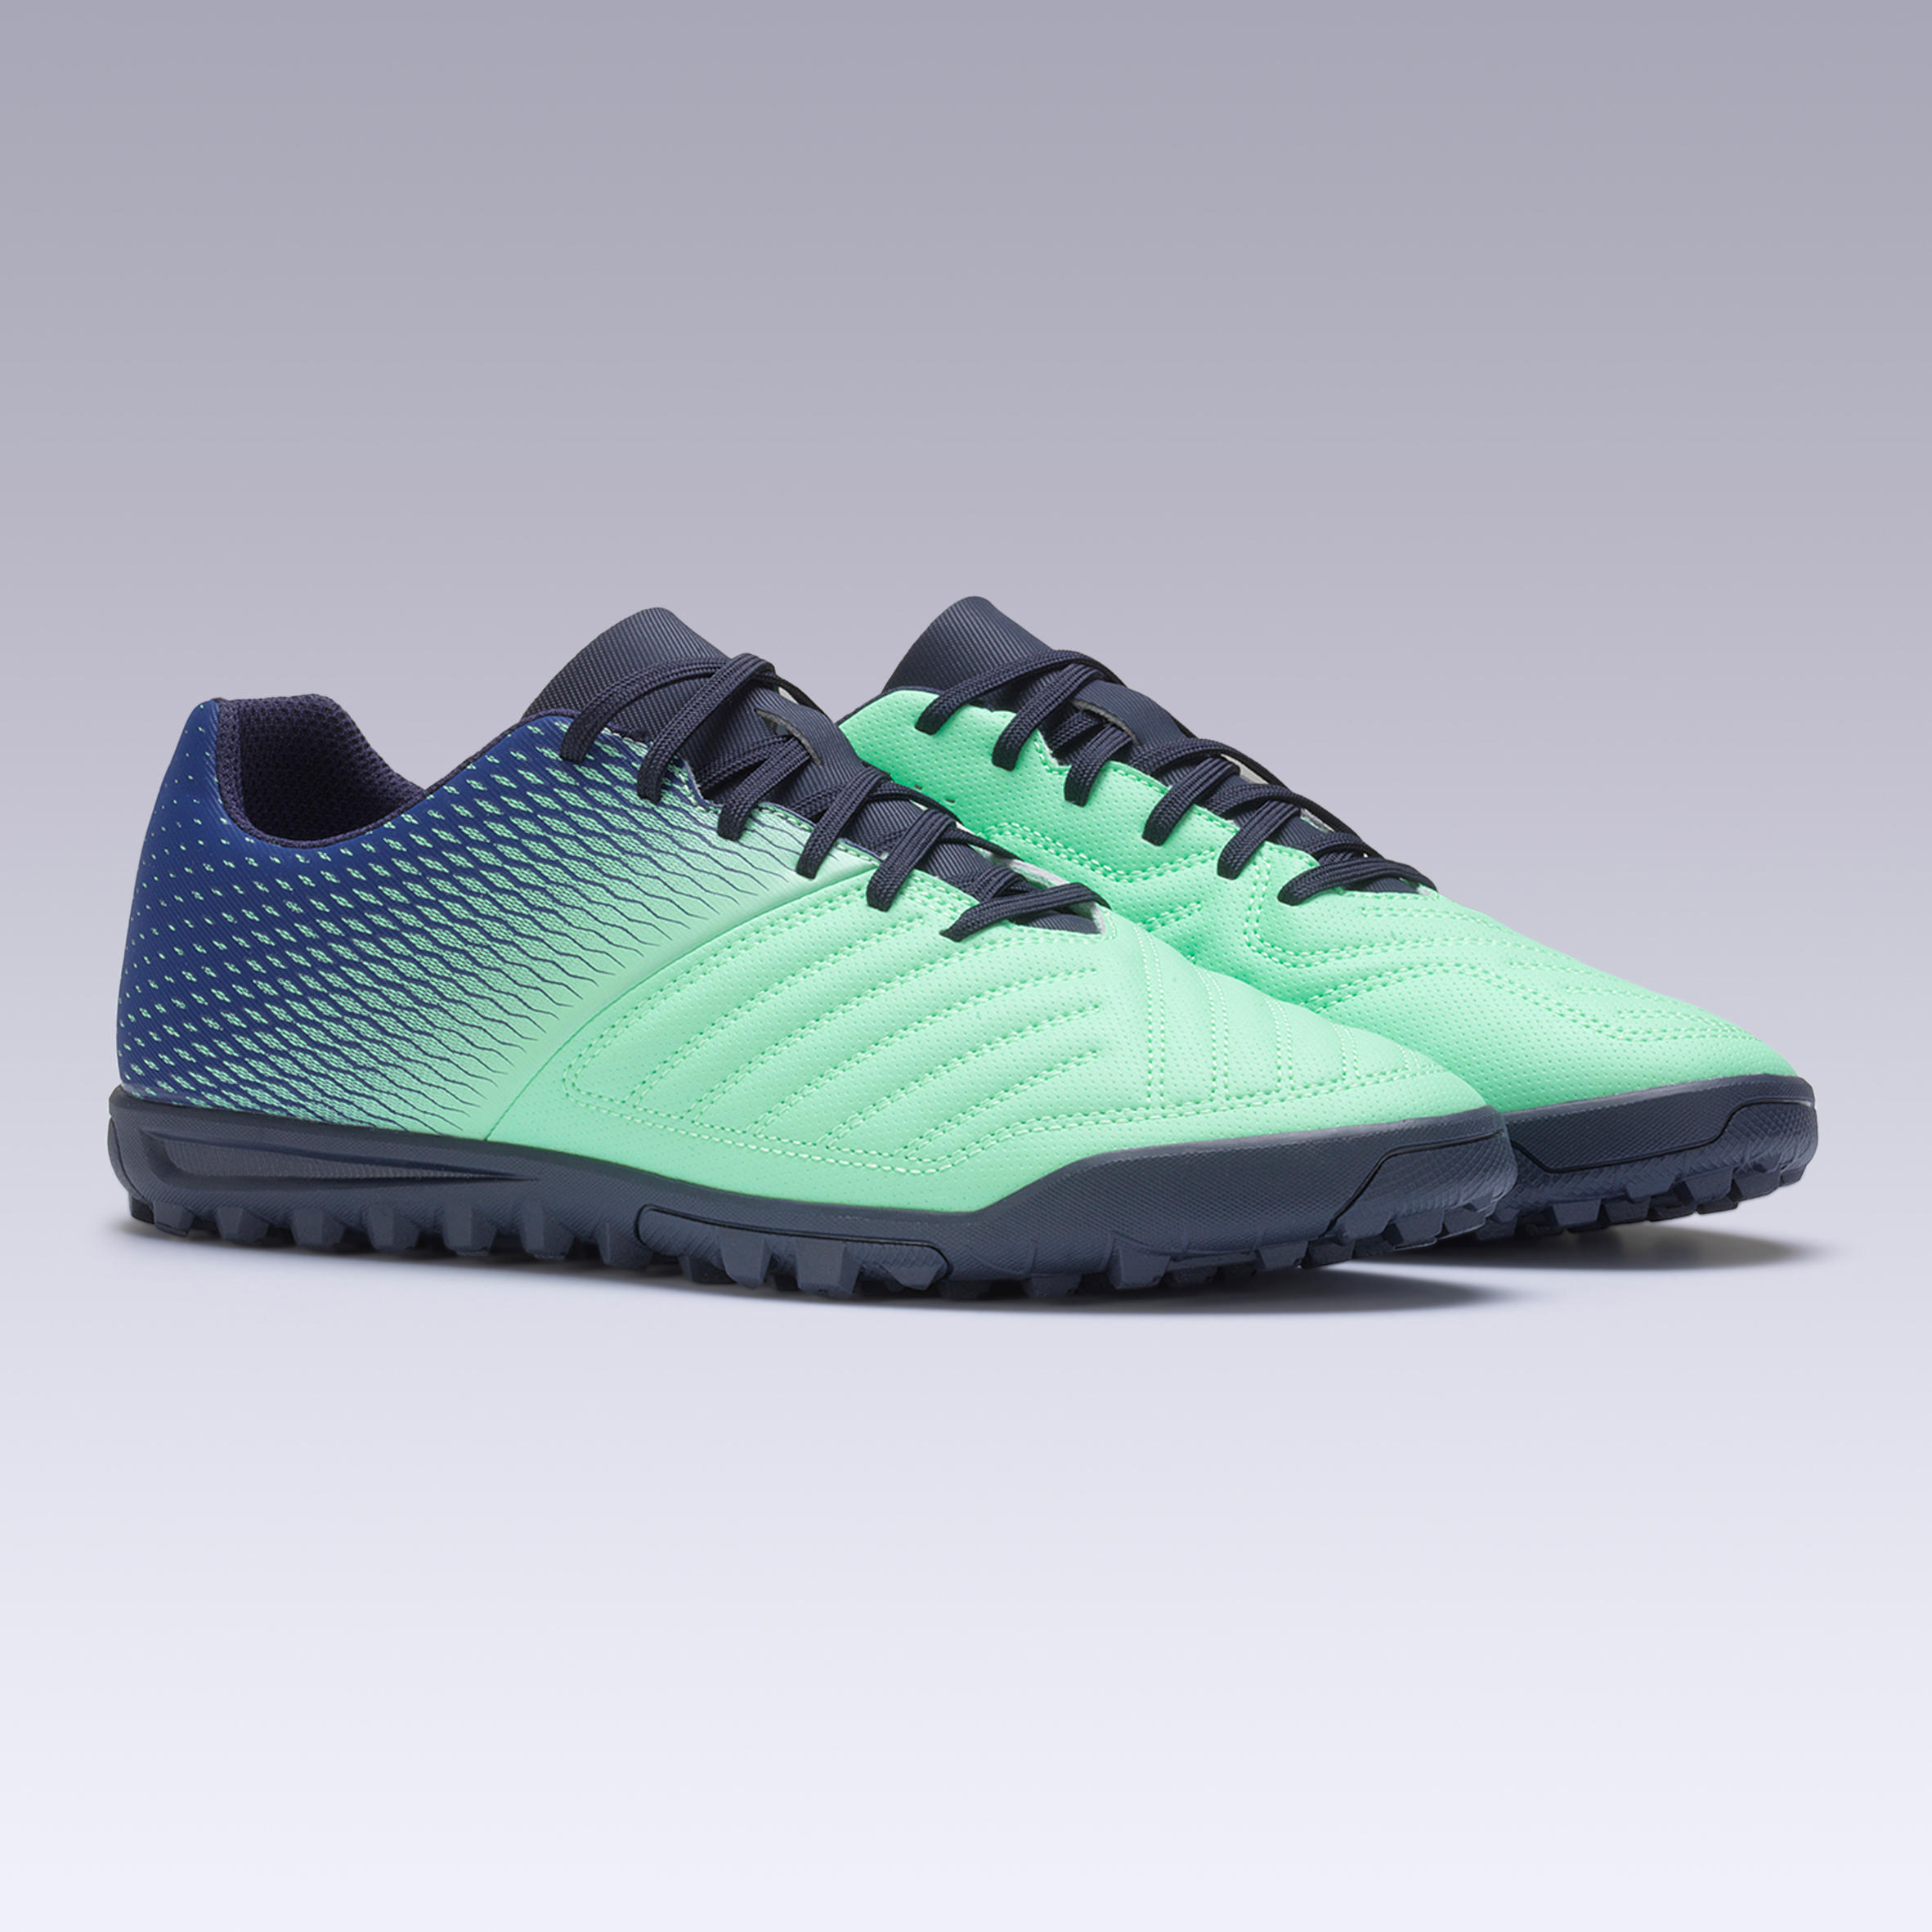 Adidas World Cup boots: Buy the Al Rihla football pack | The Independent